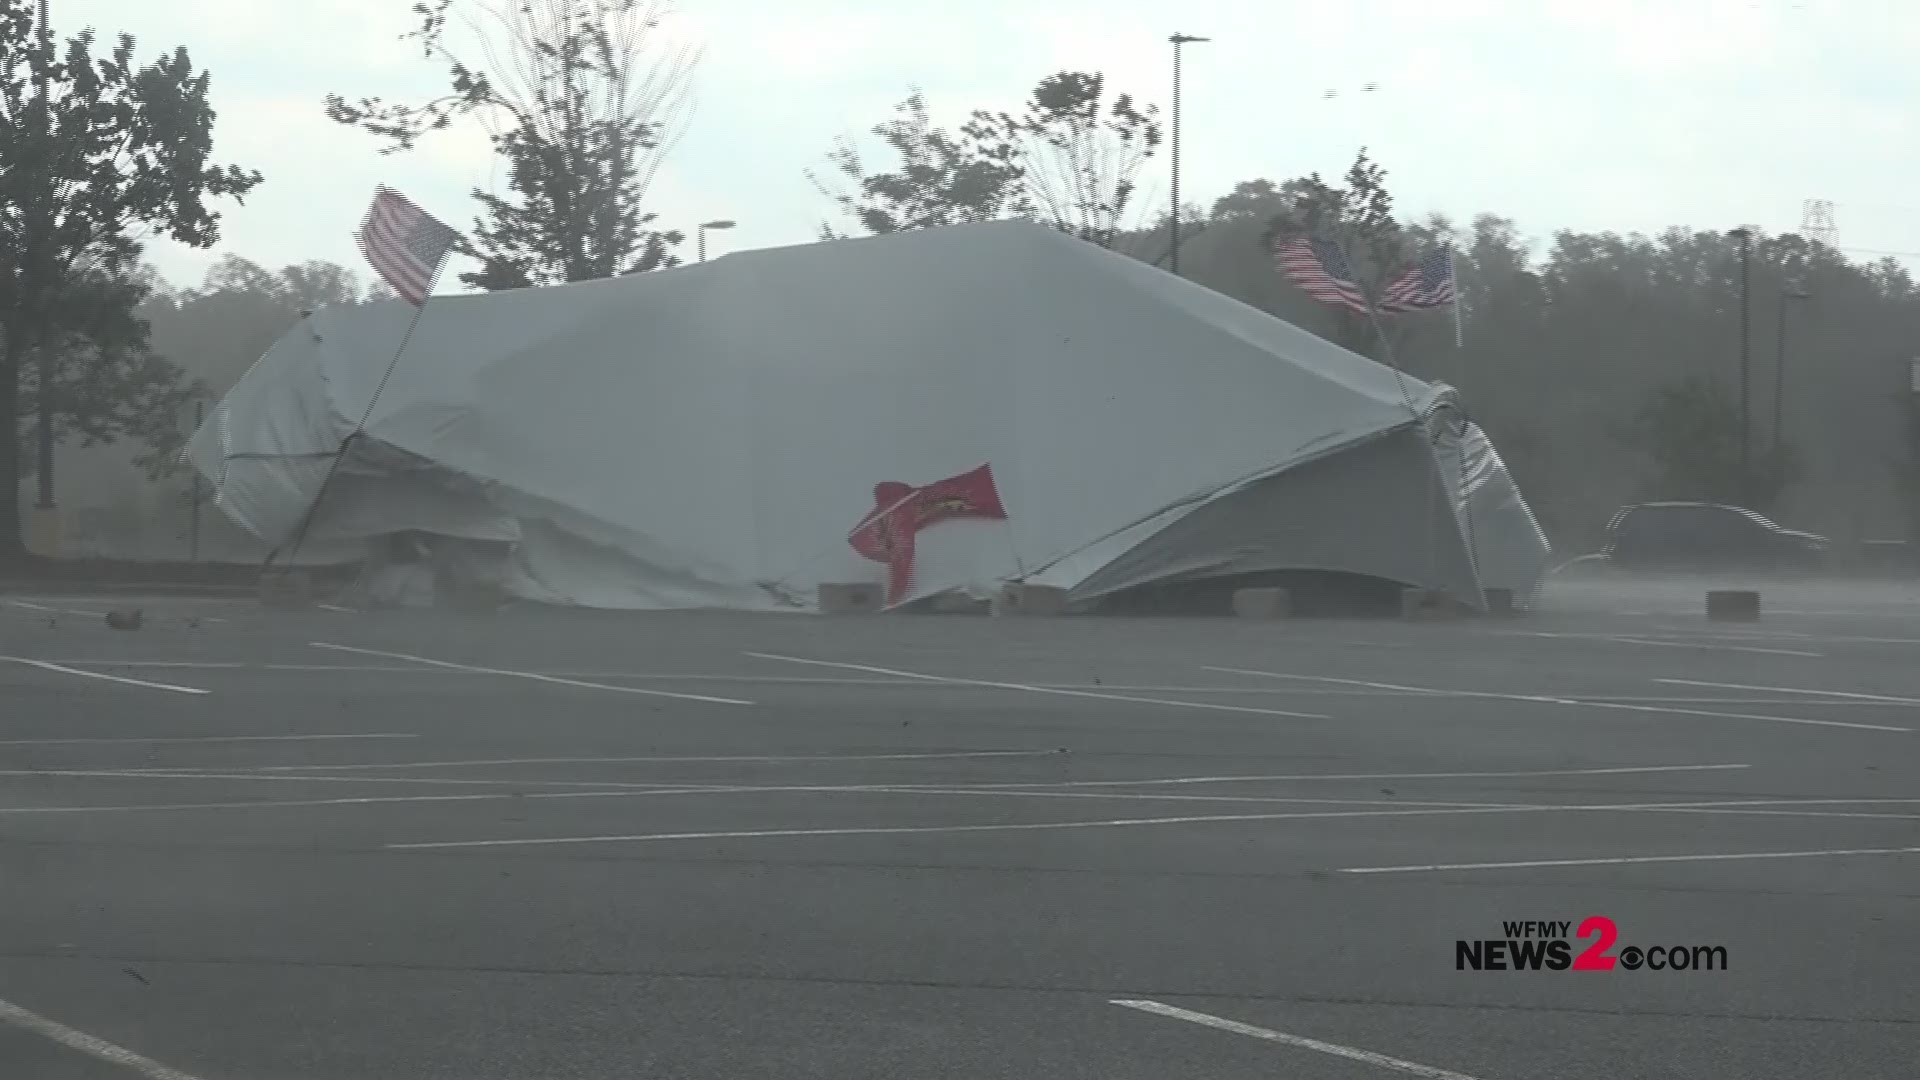 Wild video captured by WFMY News 2 shows a fireworks tent outside the Walmart at Pyramids Village as the storms moved through. High winds caused the tent to cave in and almost blow away during the storm.